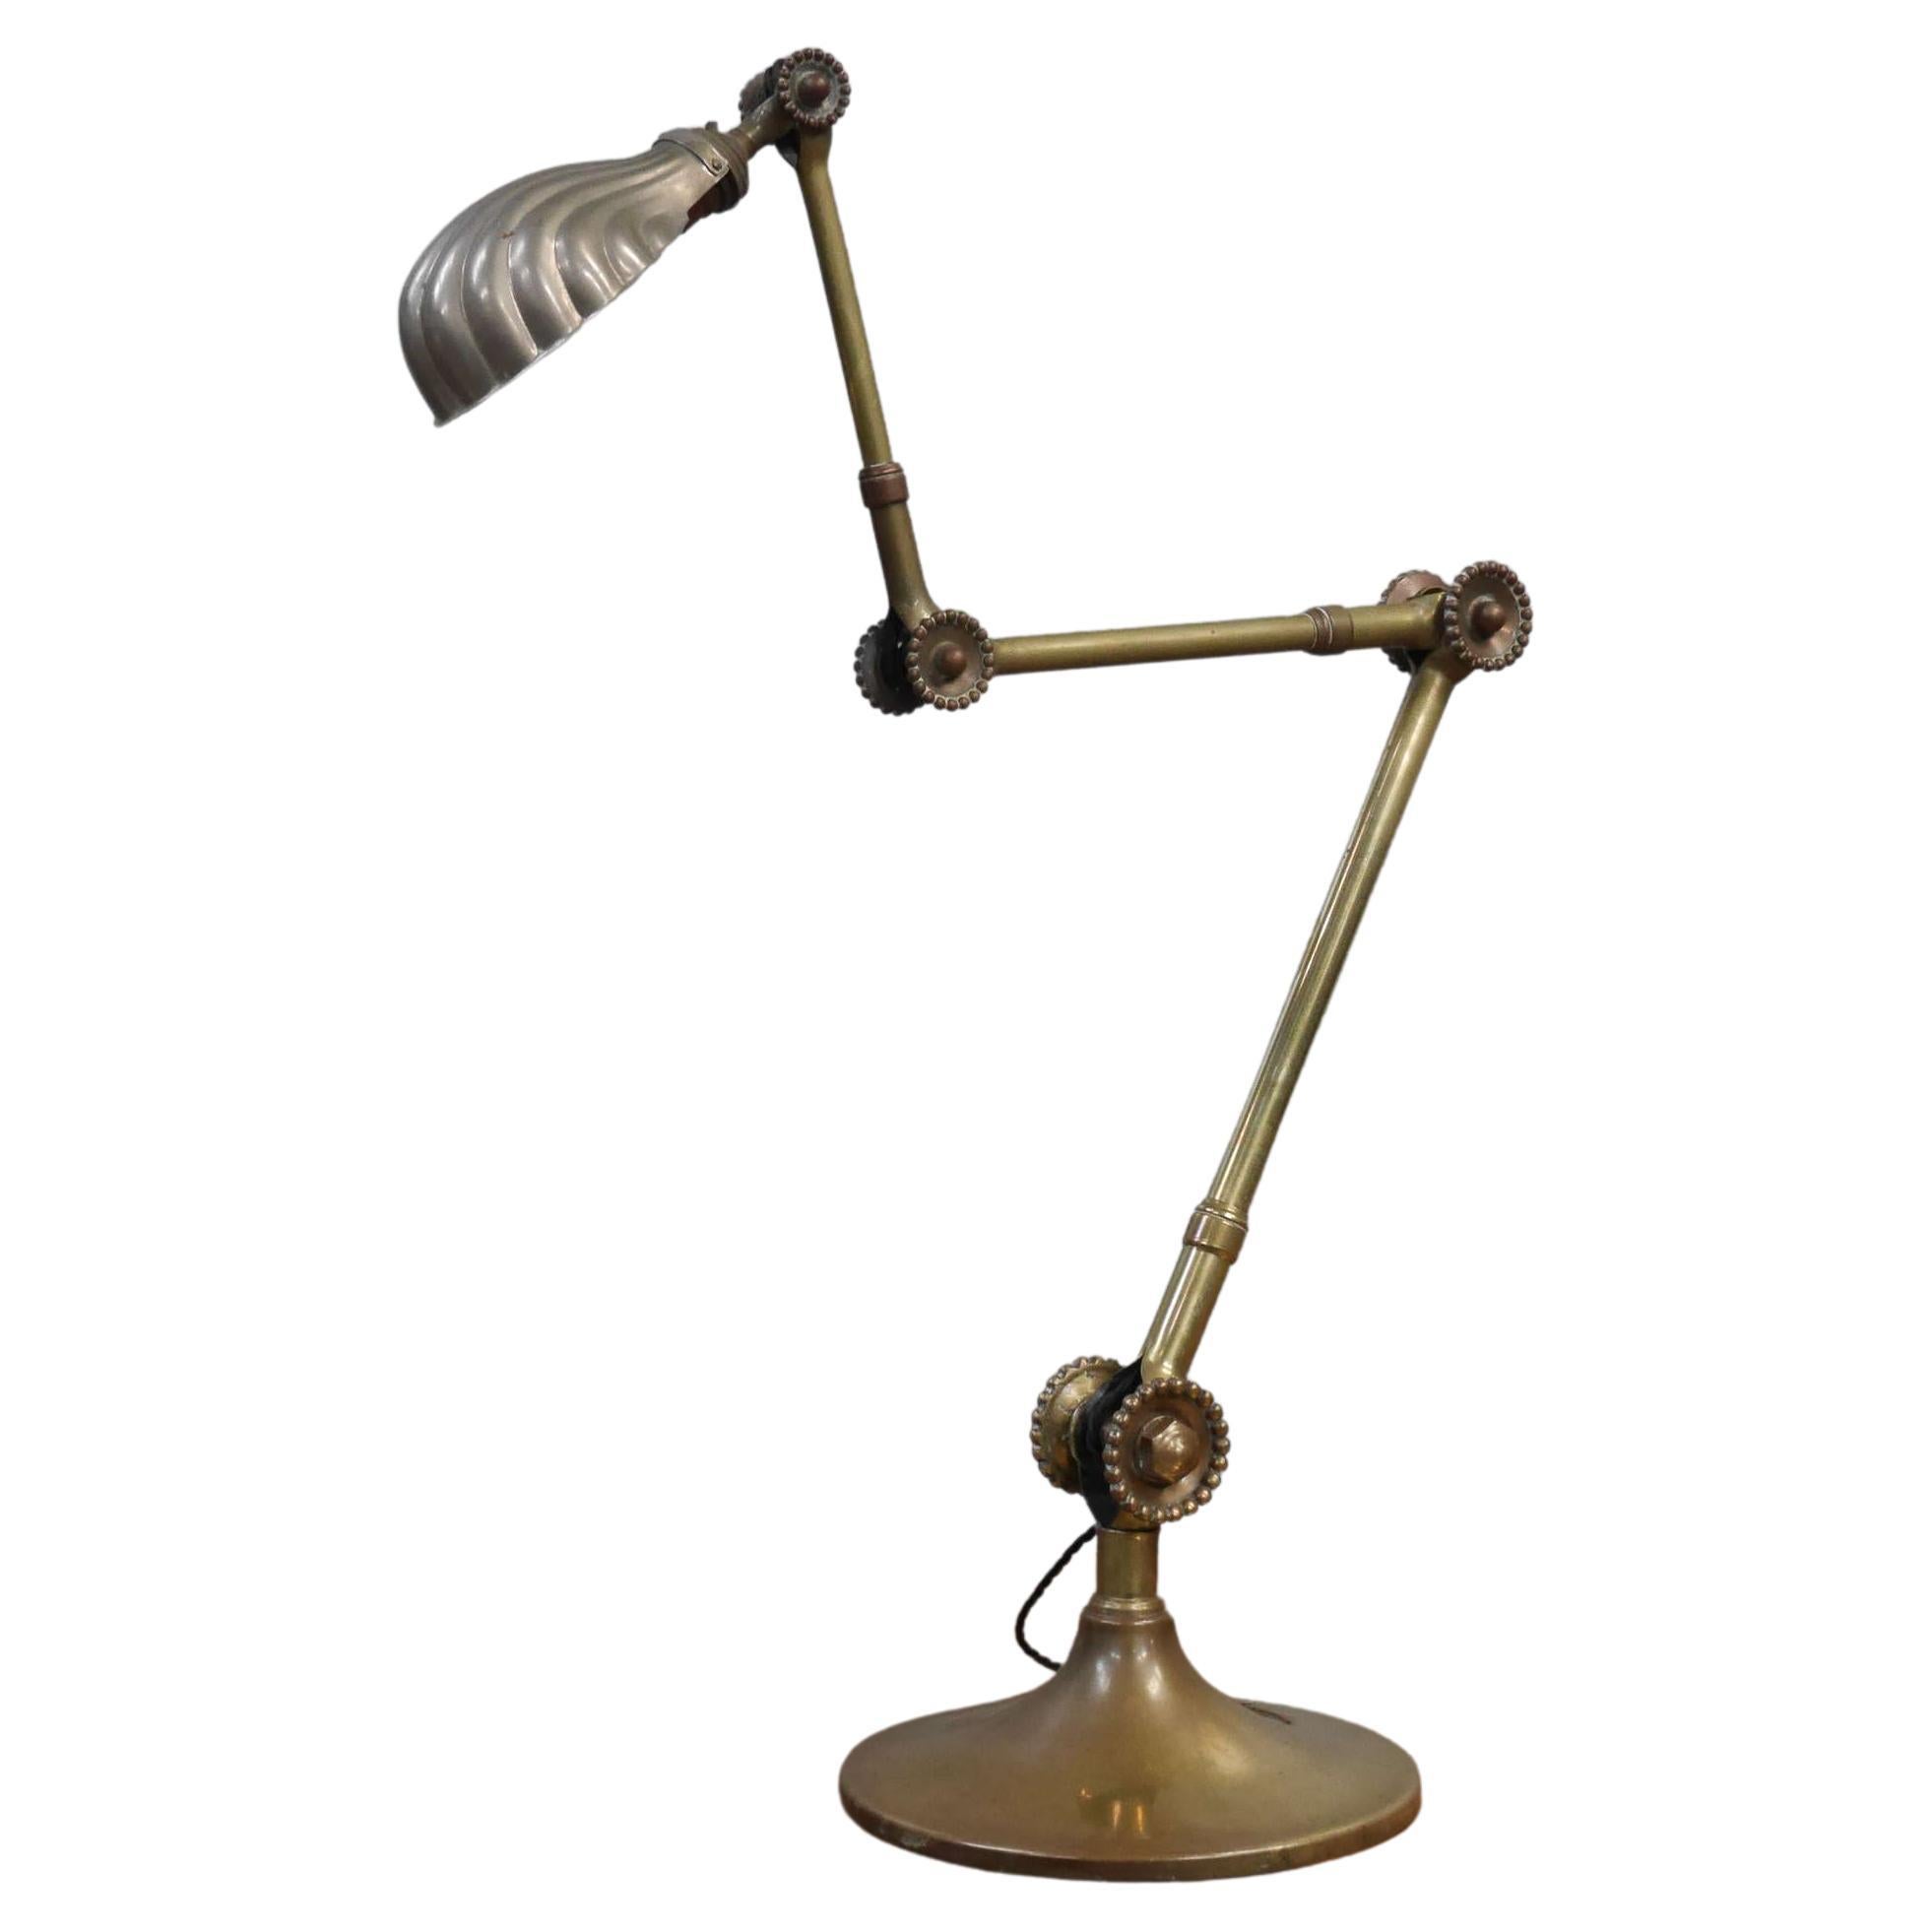 Large Articulated Brass Table Lamp by Dugdills